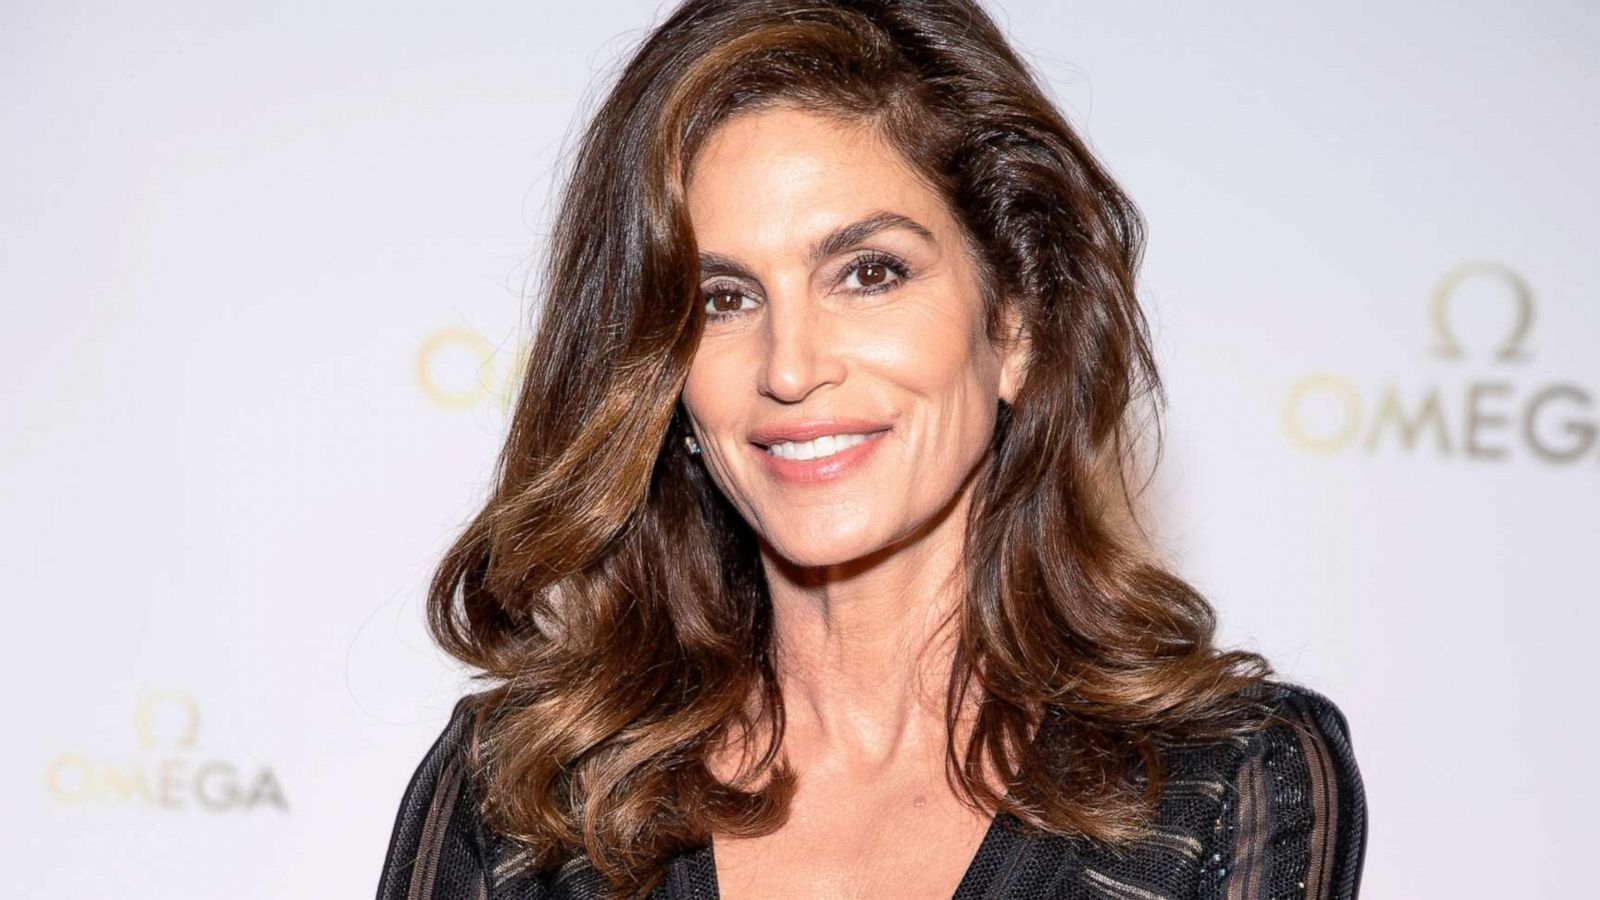 Before It Became Her 'Greatest Asset,' Cindy Crawford Wanted to